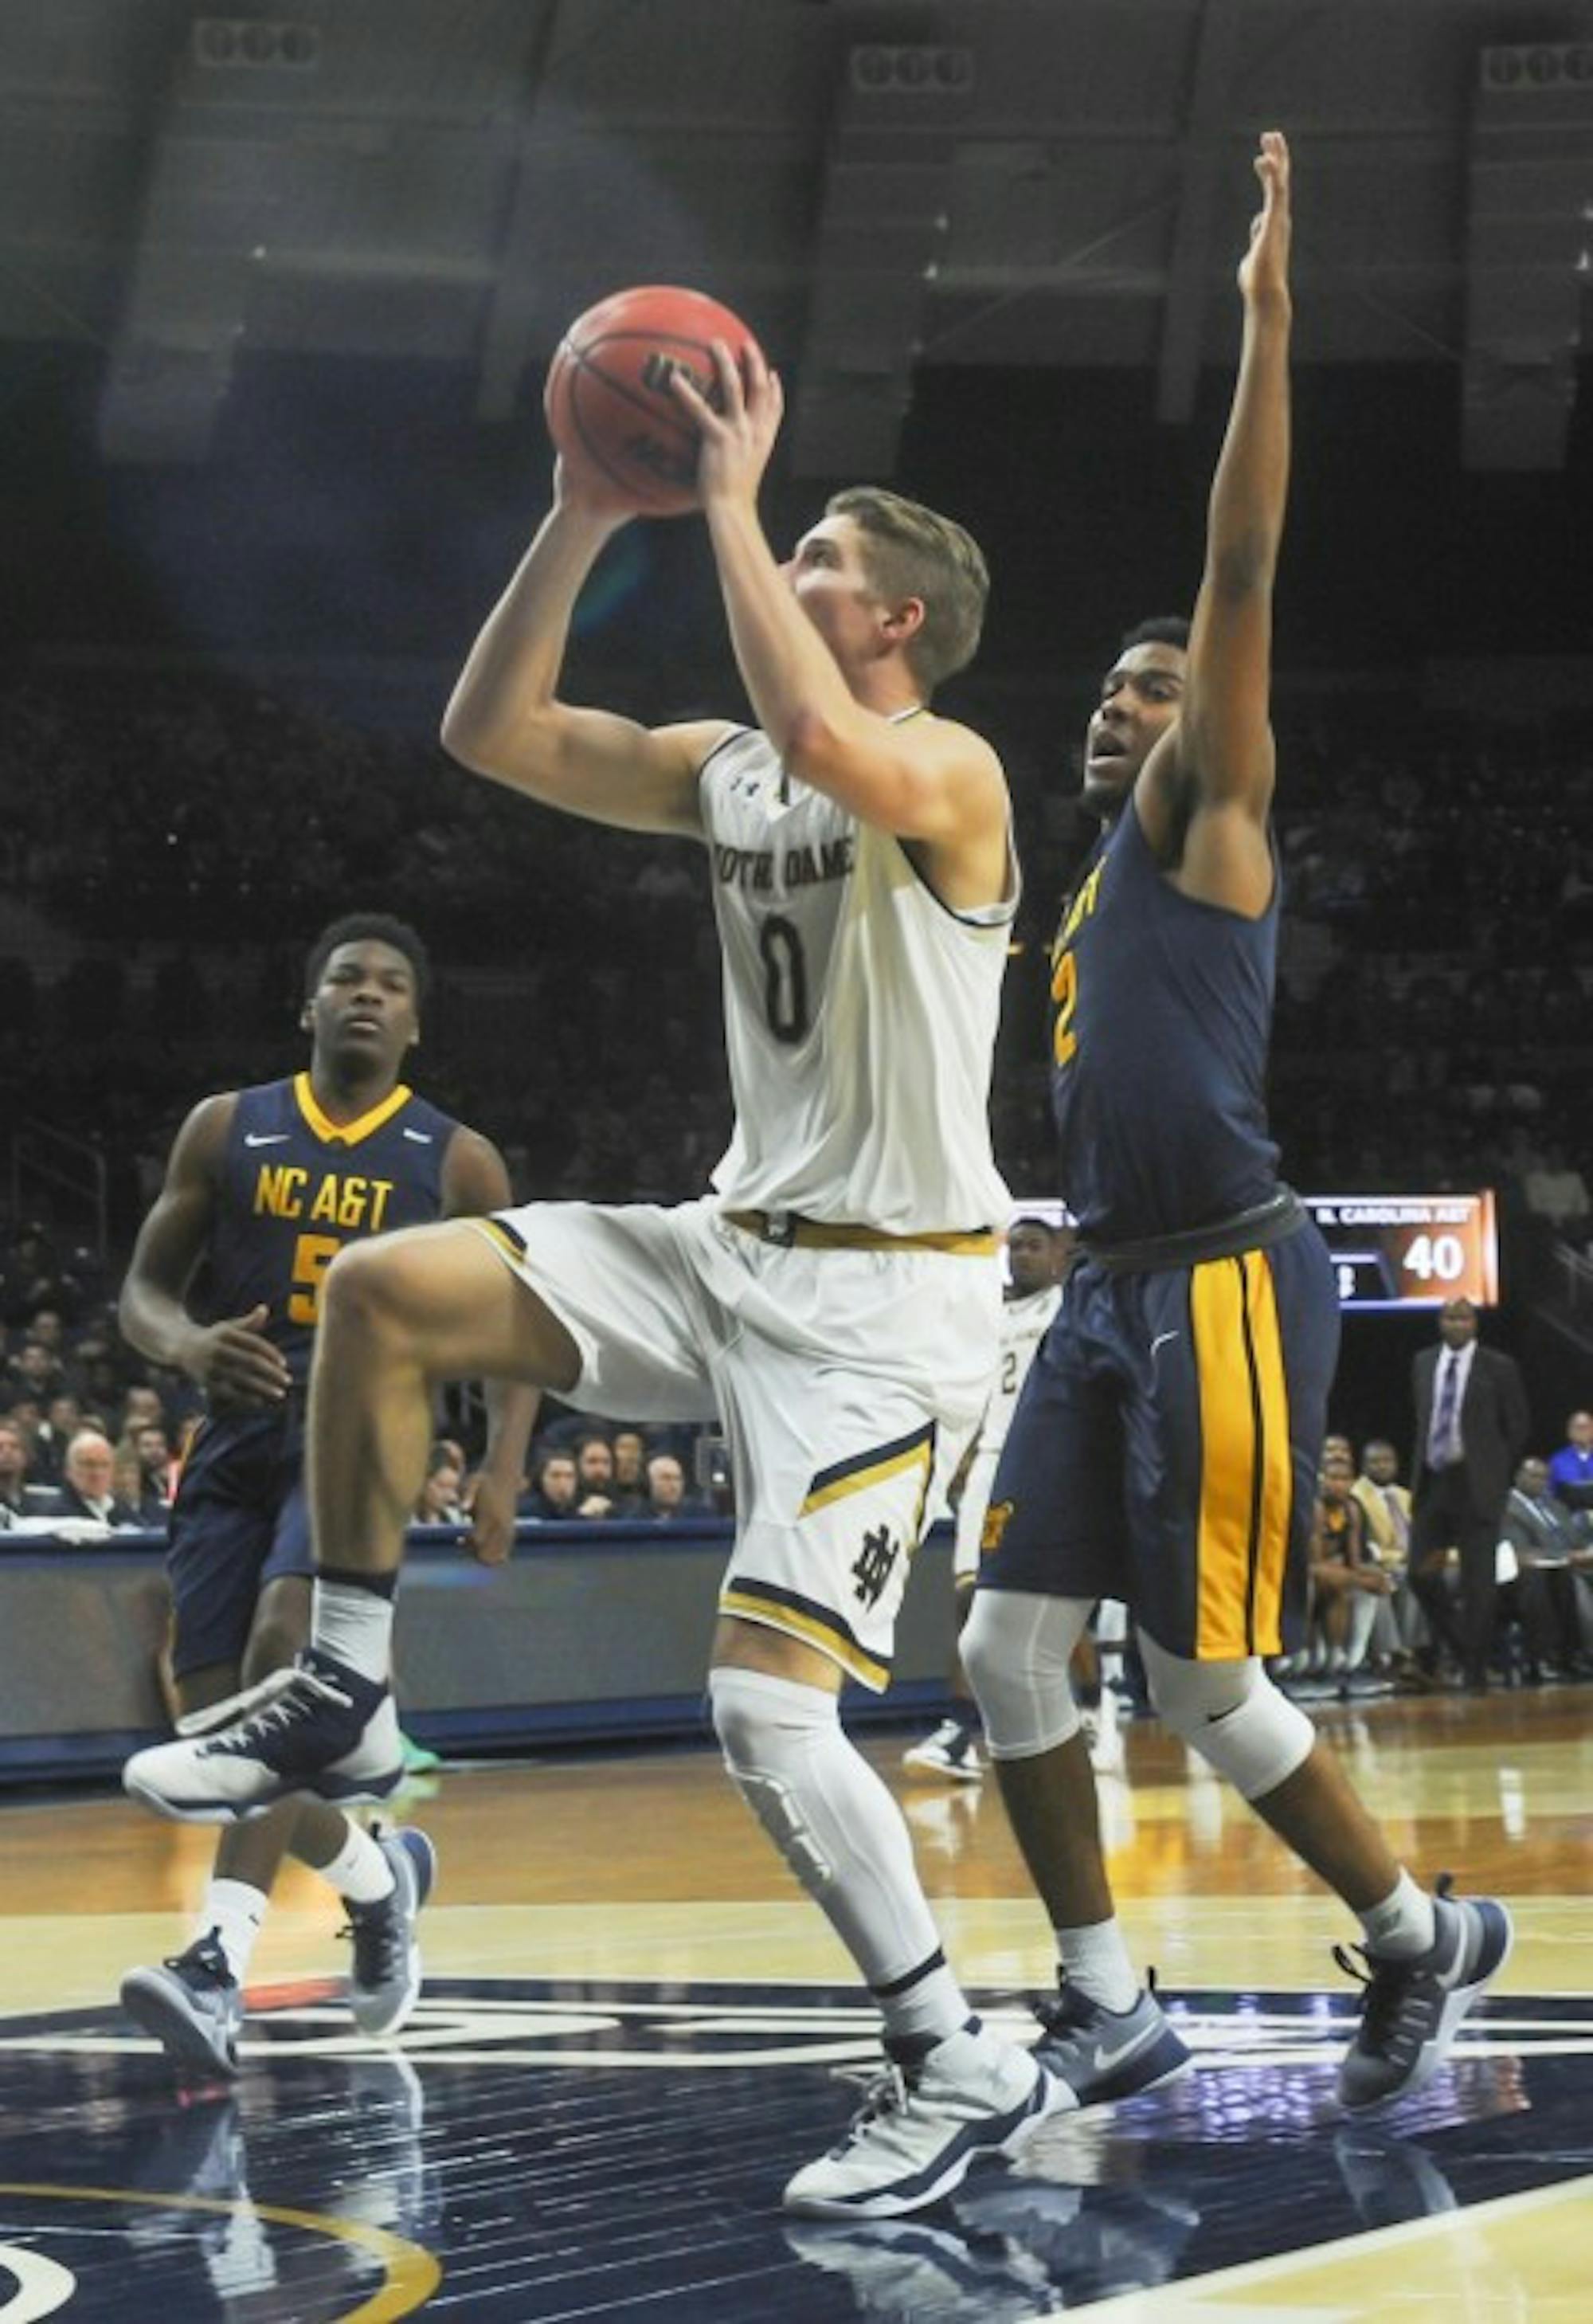 Irish sophomore guard Rex Pflueger goes up for a shot attempt during Notre Dame's 107-53 win over North Carolina A&T on Sunday.